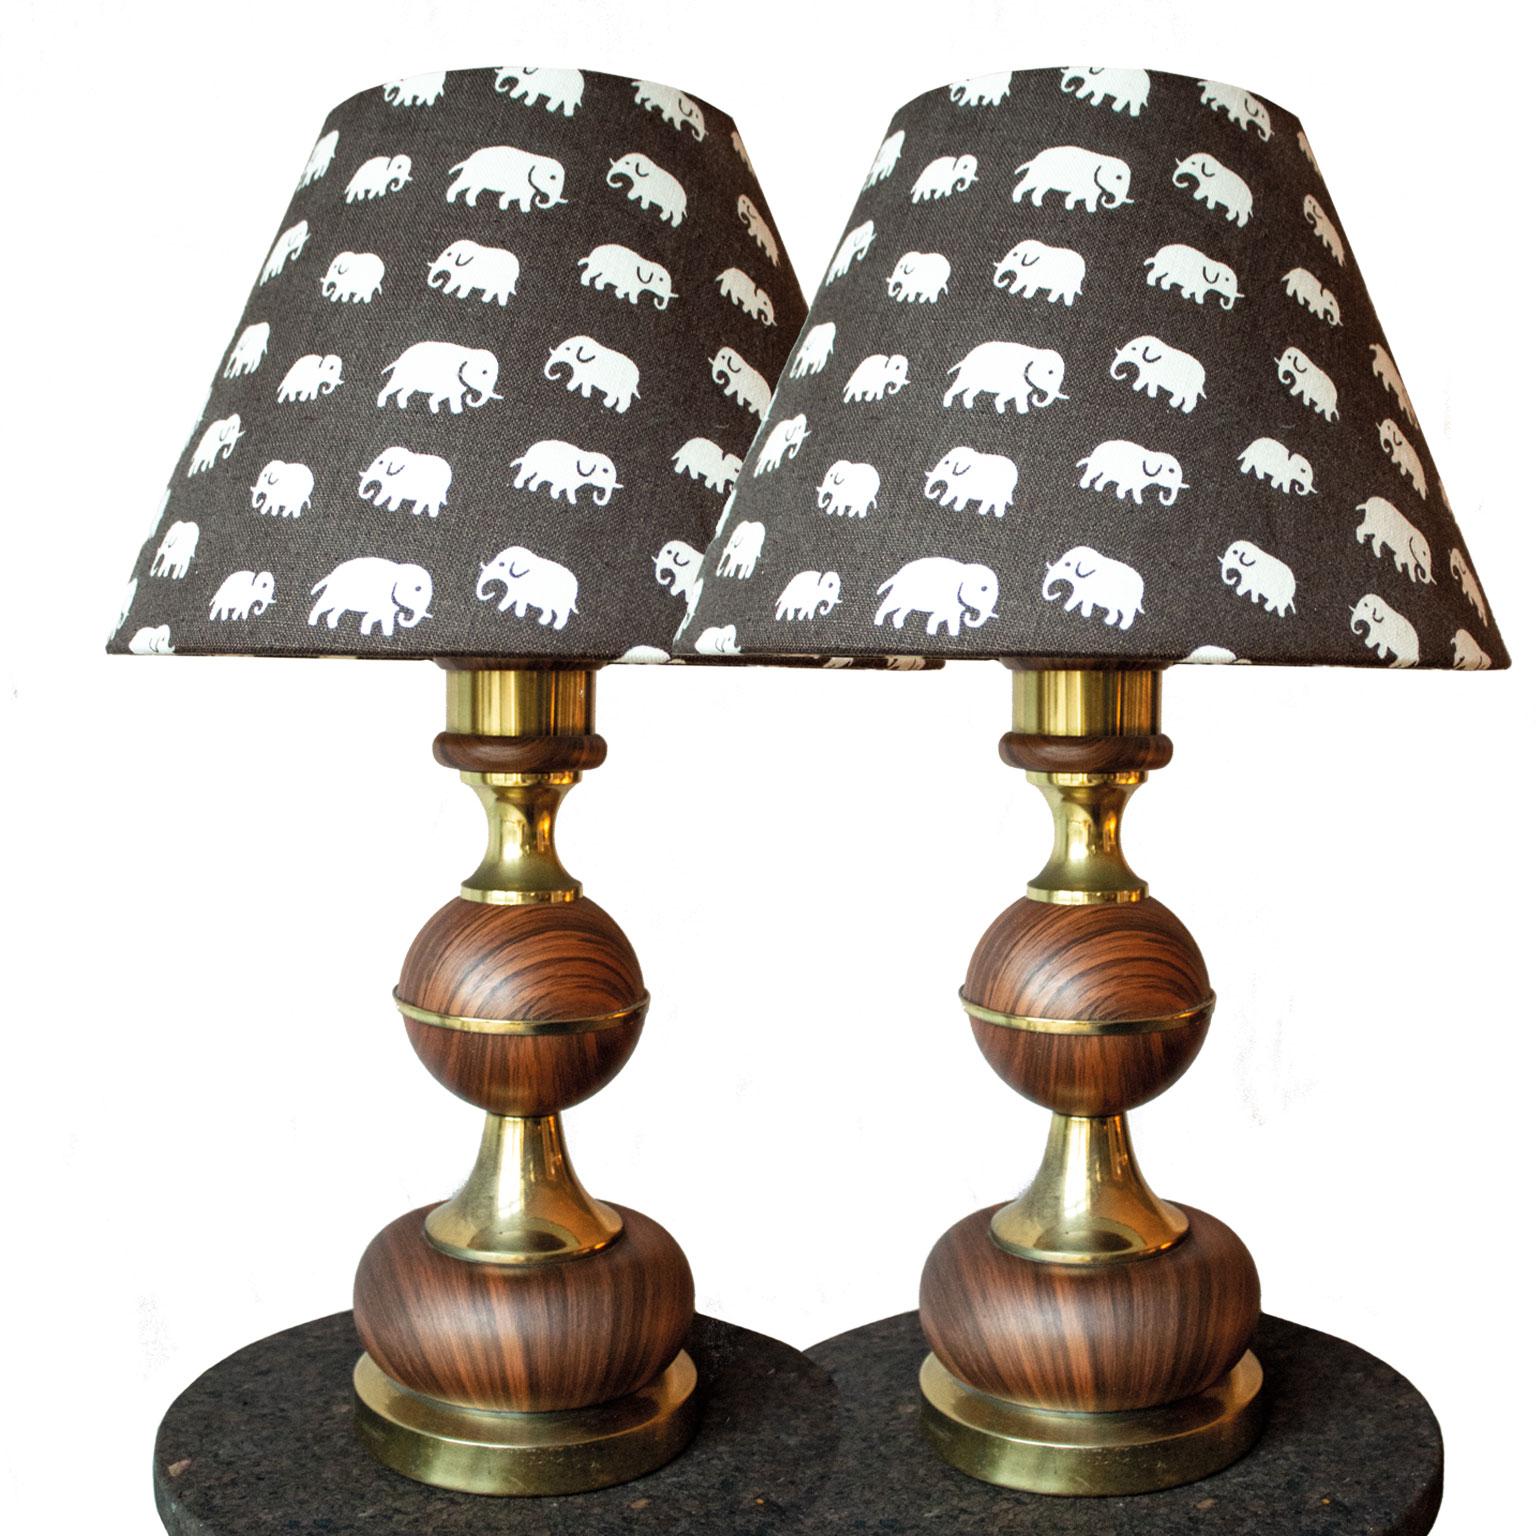 Scandinavian Modern Pair of Wood and Brass Table Lamps from Sweden For Sale